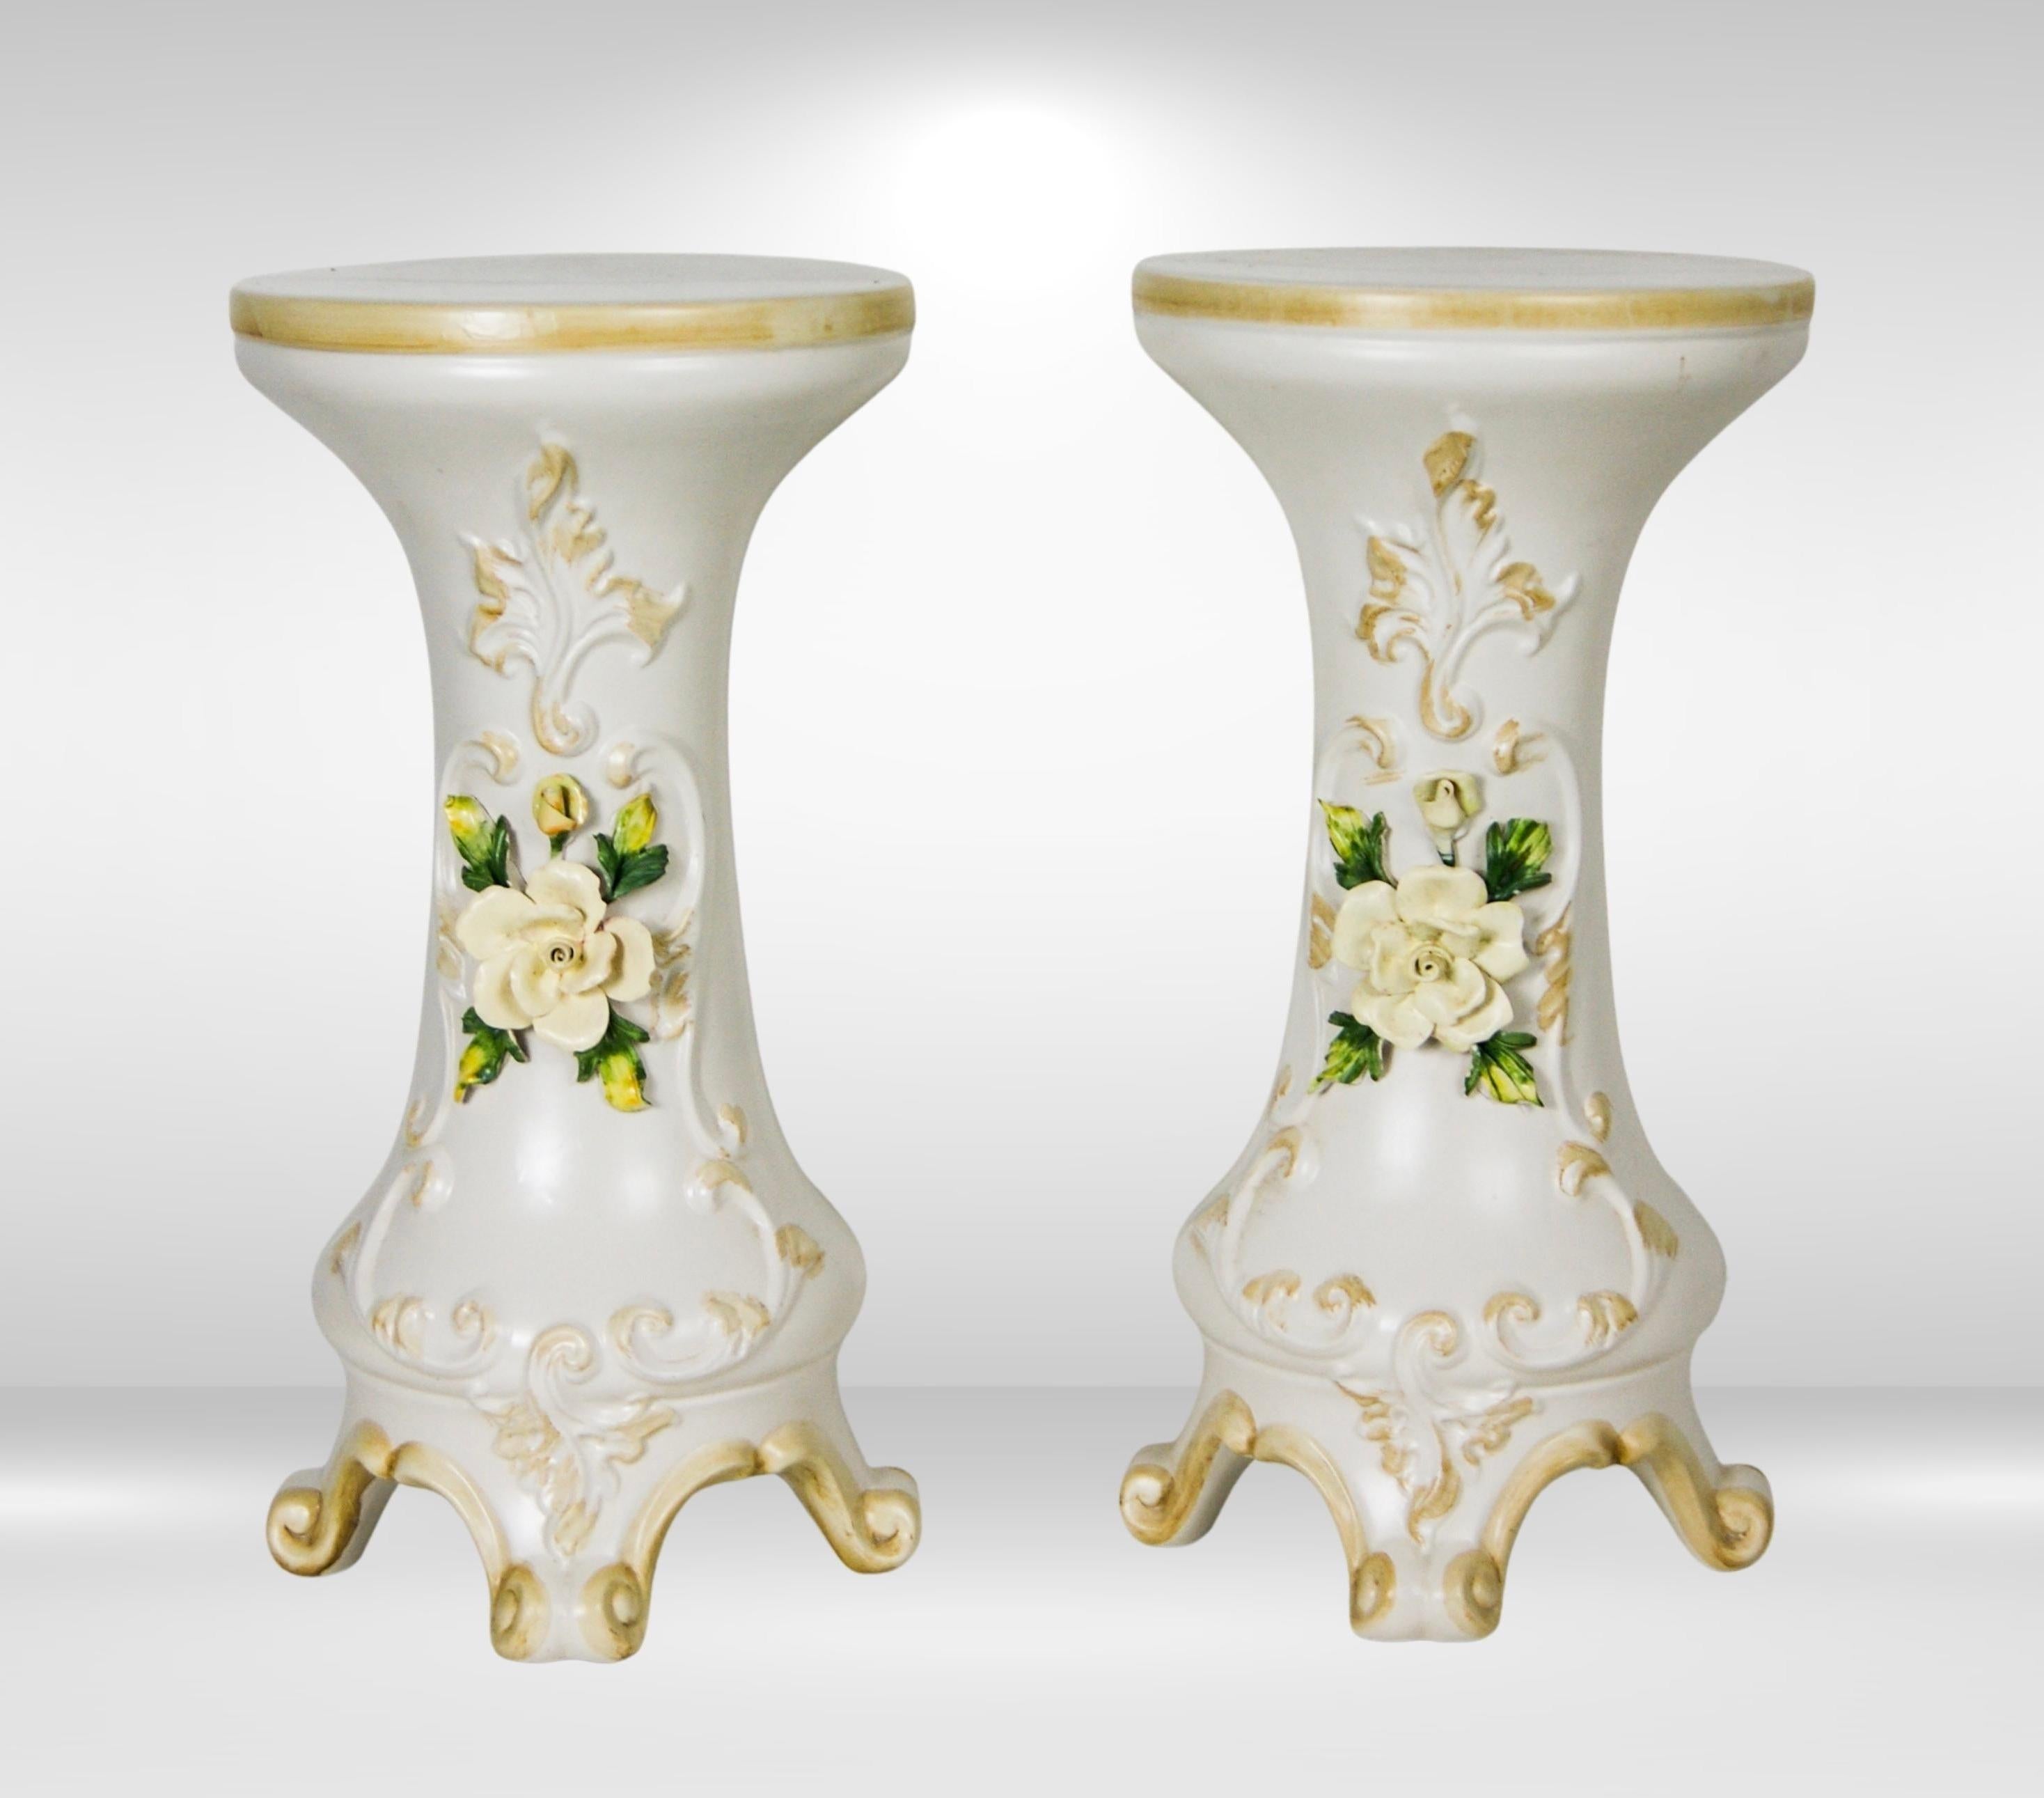 Baroque Mid-Century Capo Di Monte Italy Pair of Jardinières on Pedestal Stands For Sale